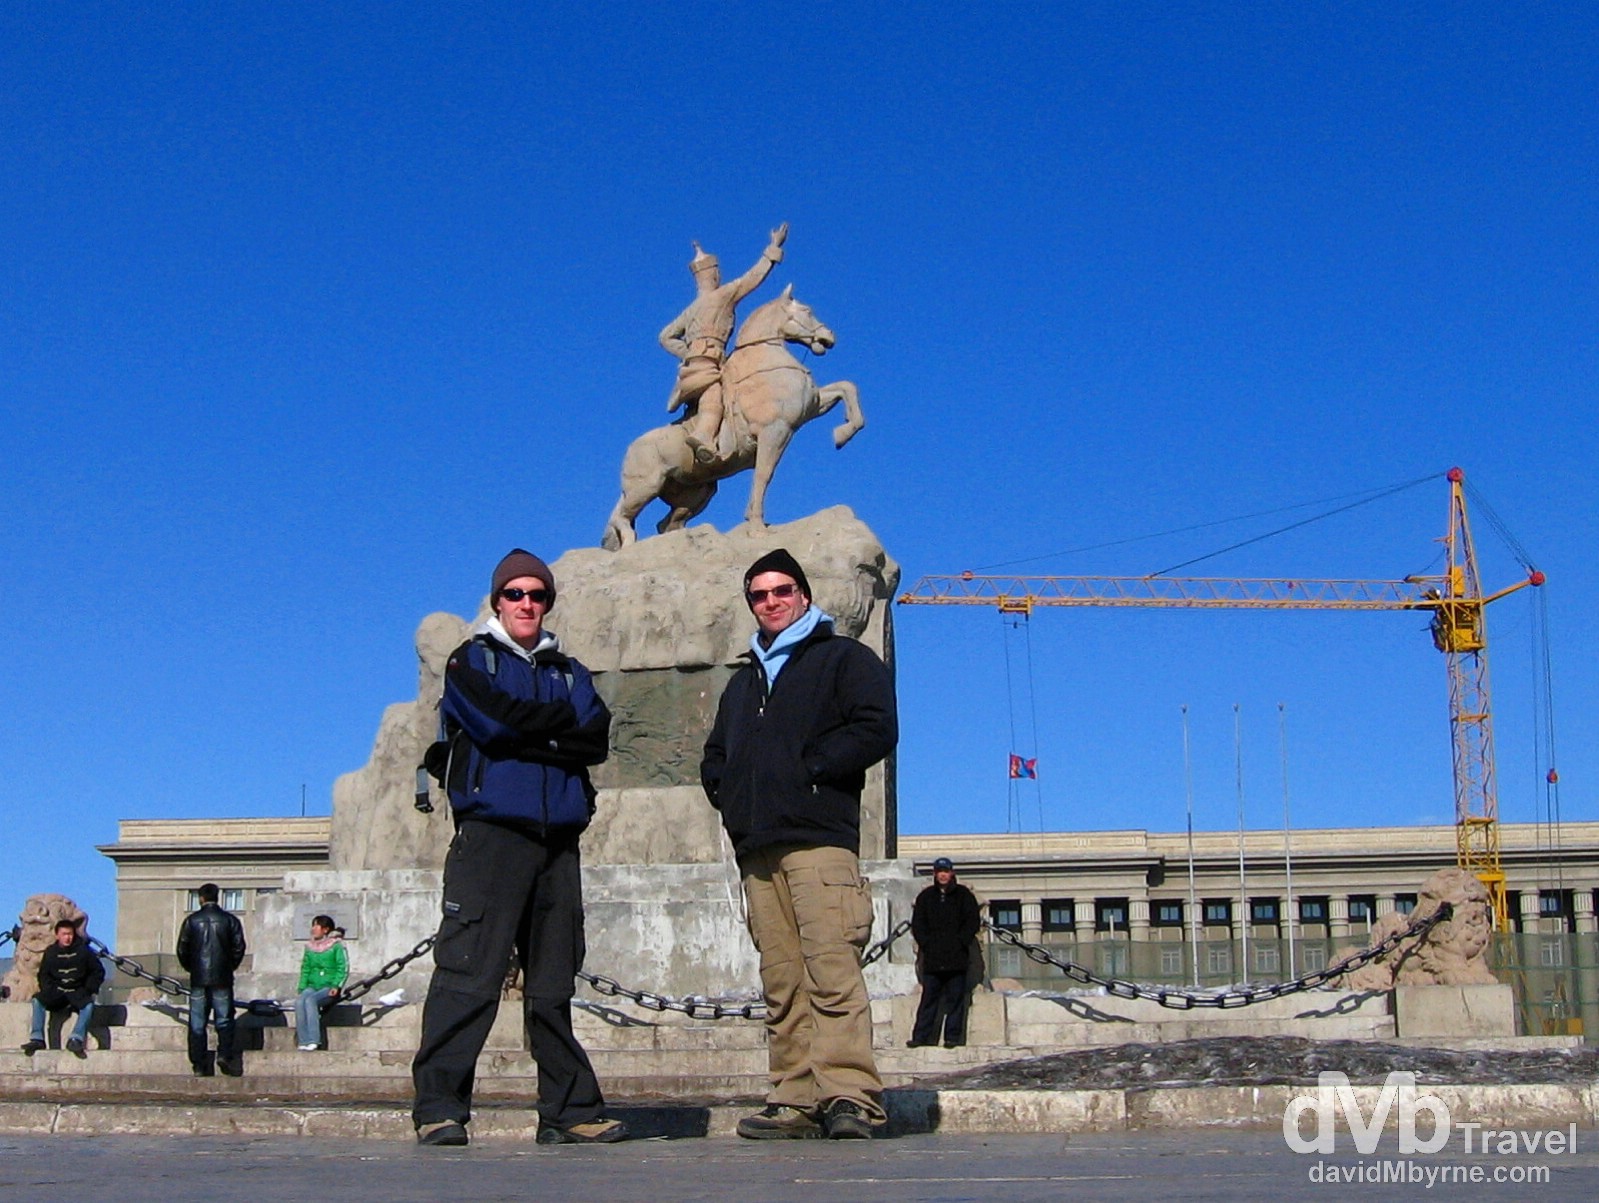 My travelling buddy Henk (right) & I and in Sükhbaatar Square, Ulan Bator, Mongolia. February 16, 2006.